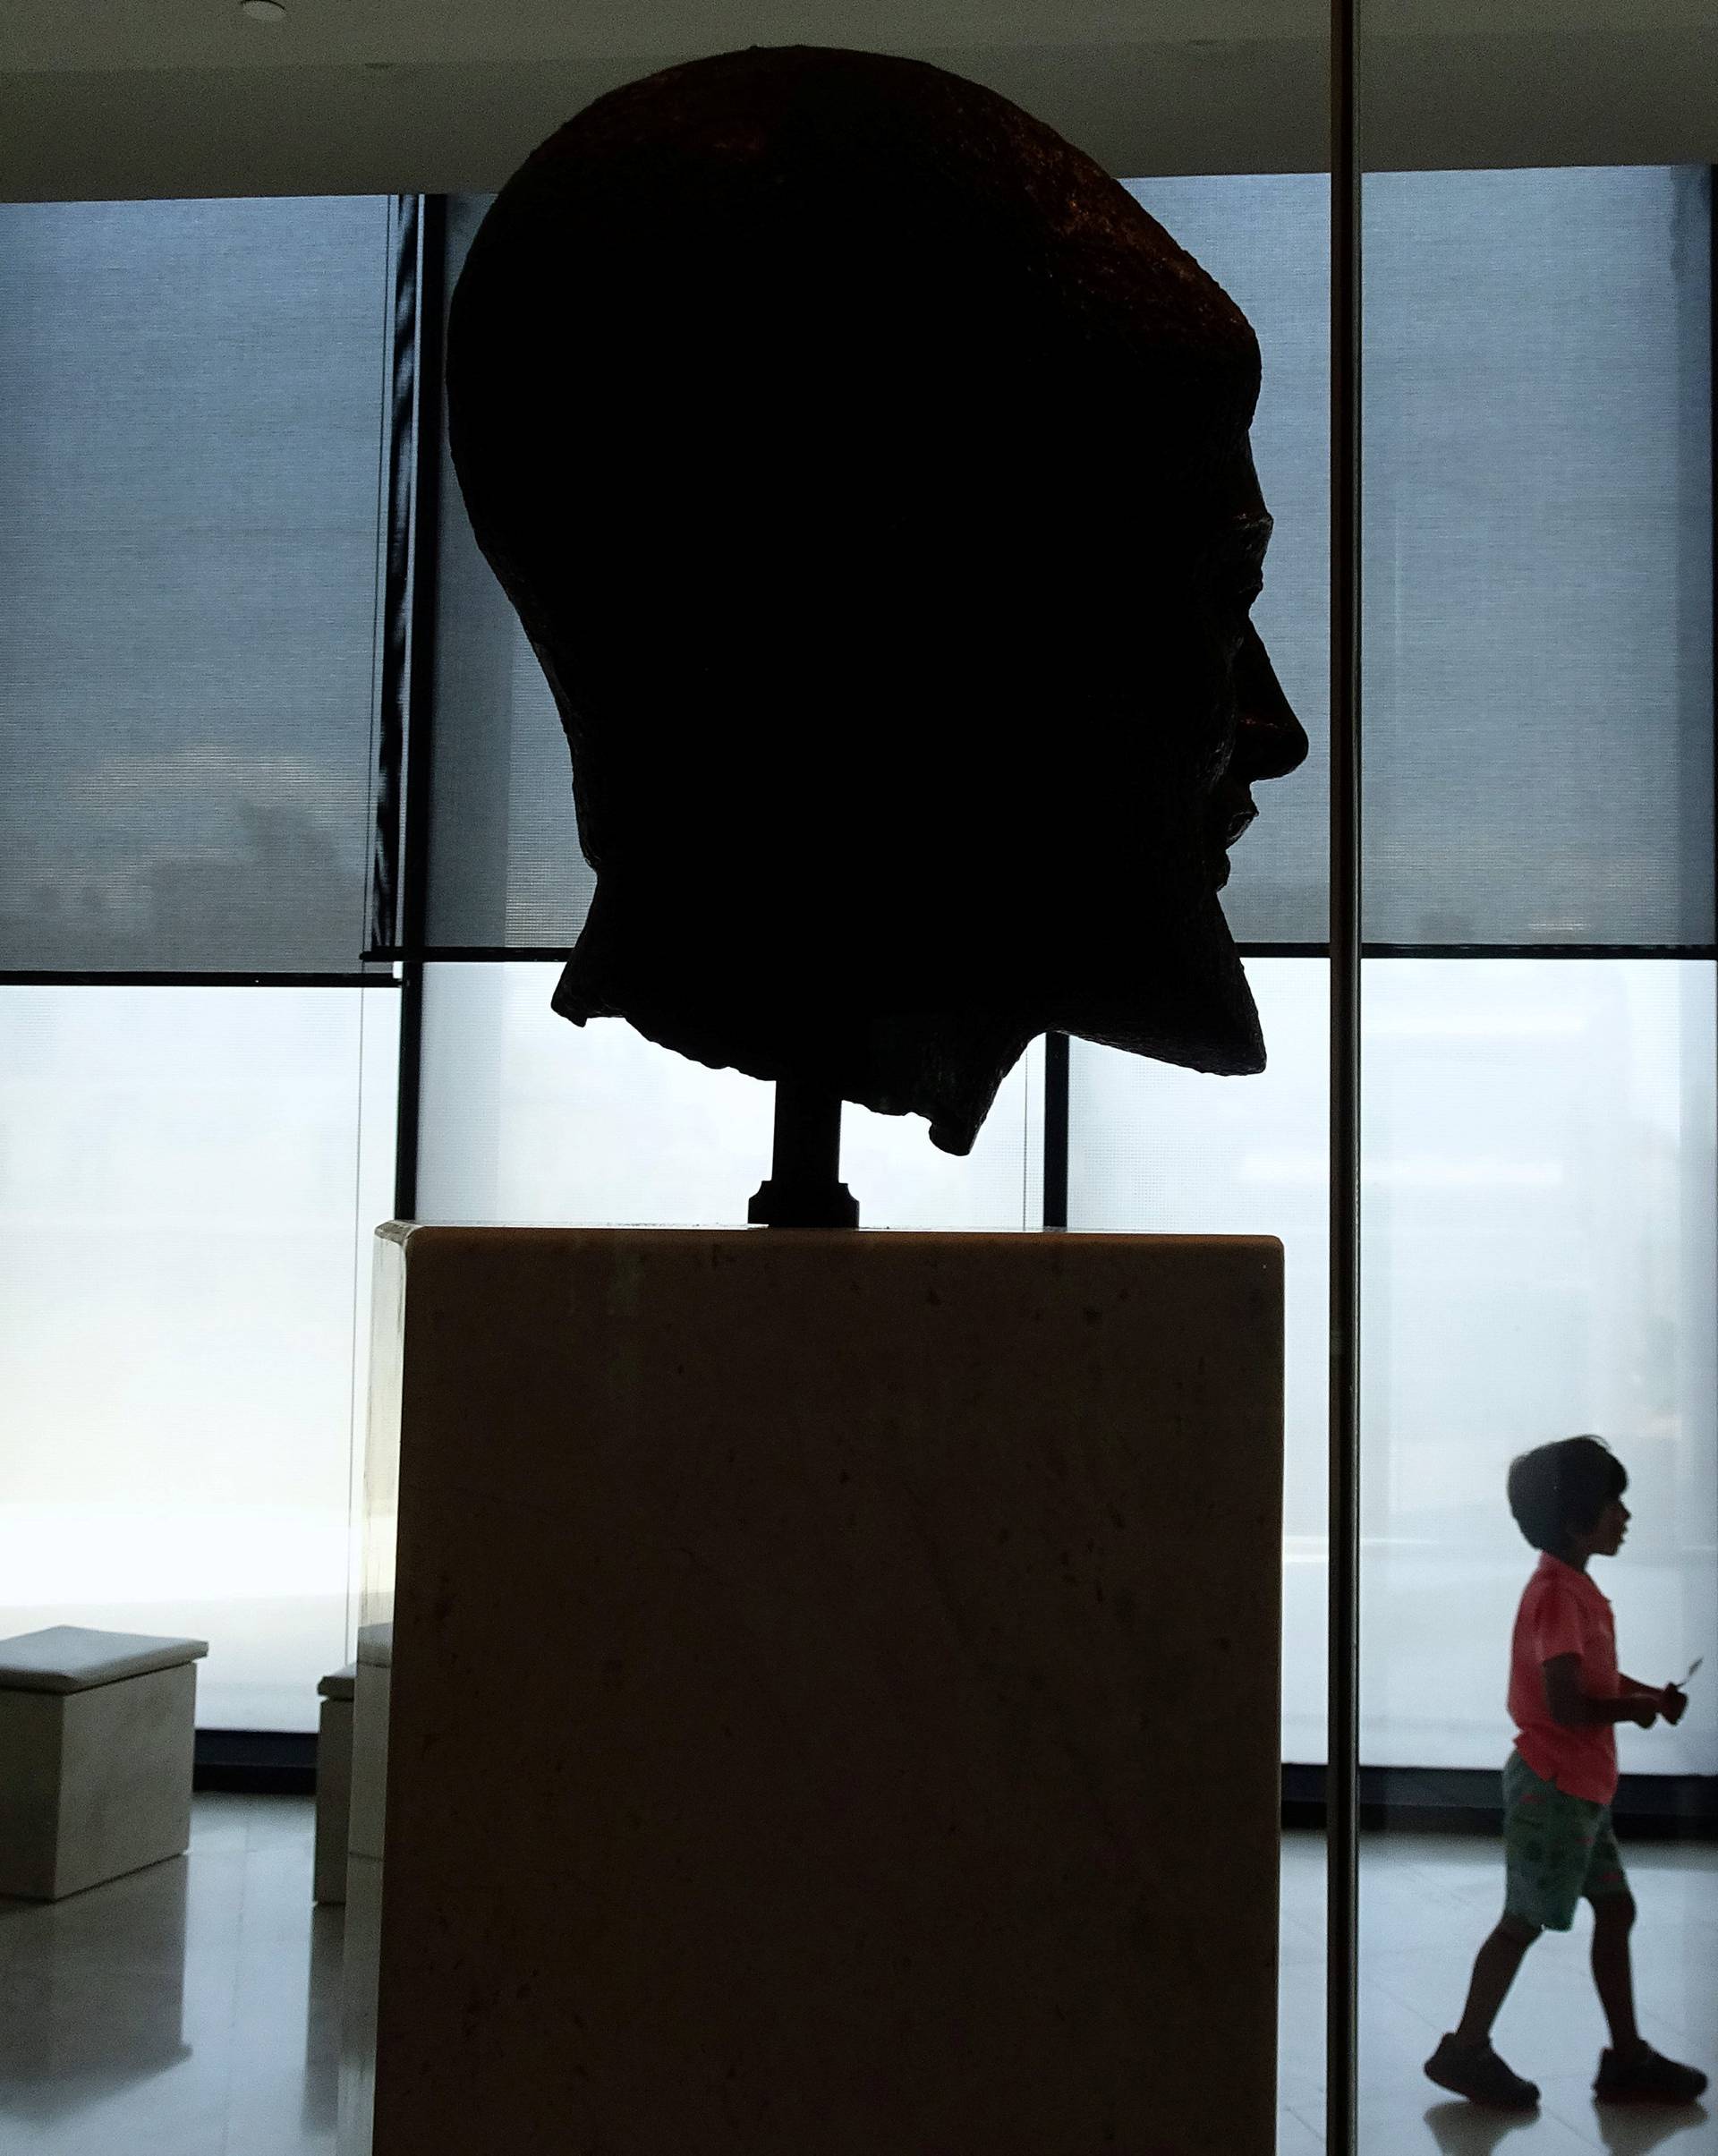 A young tourist walks inside the new Acropolis museum in Athens